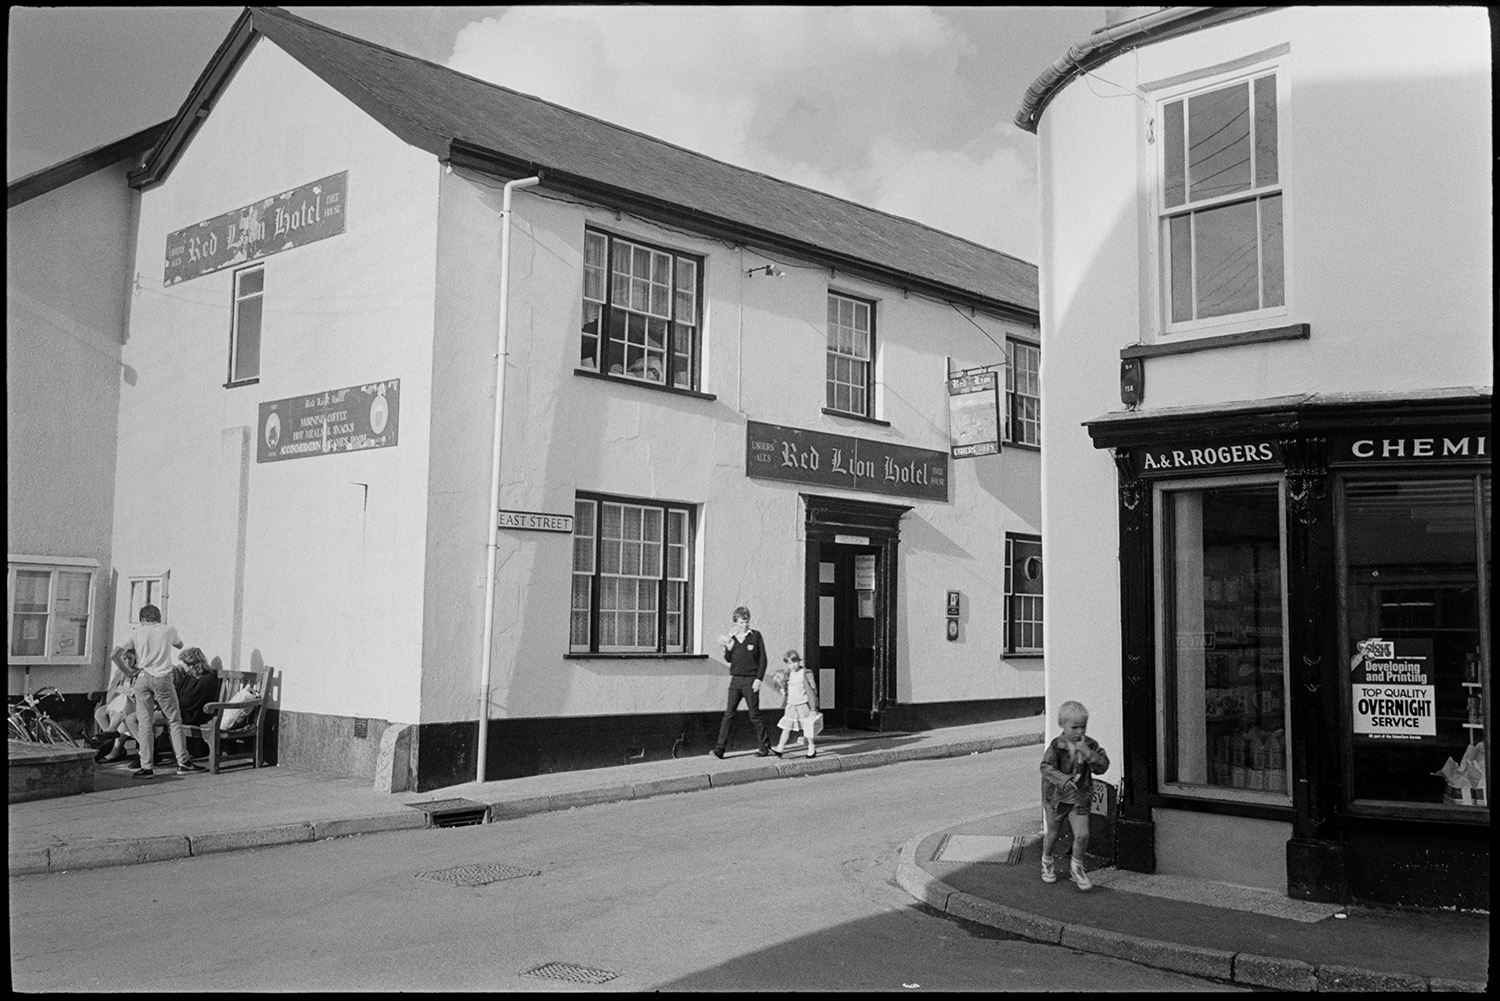 Street scenes with children practising throwing a baton.
[The corner of East Street in Chulmleigh, showing the Red Lion Hotel on one side and A & R Rogers the Chemists on the other. There is a noticeboard and a wooden bench with people sitting on it by the hotel and young children are walking along the pavement.]